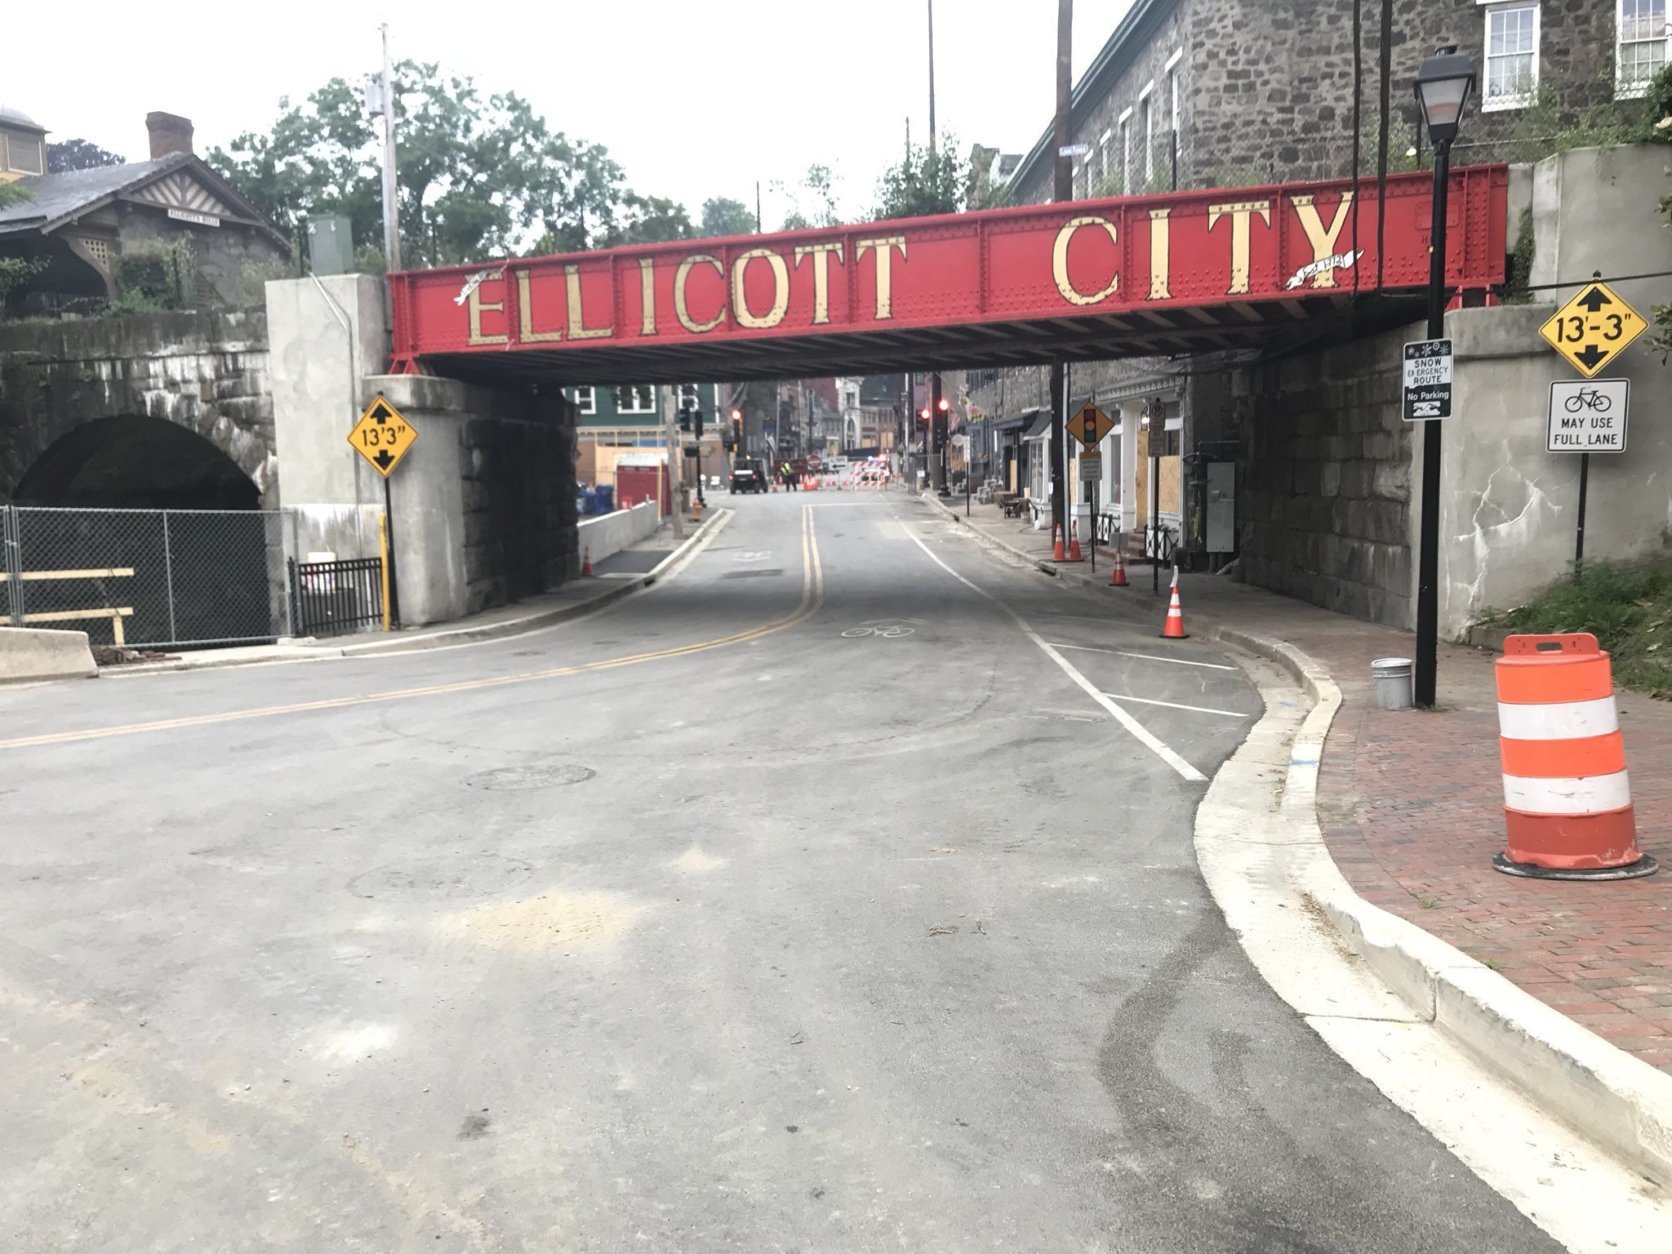 As of 6 a.m. on Tuesday, drivers could cross the Patapsco River bridge from Baltimore County onto Main Street in Ellicott City. Traffic must turn left after one block, on Maryland Ave, but this allows a cut-through. The no access zone remains, in the hardest-hit stretch of Main Street. (WTOP/Neal Augenstein) 